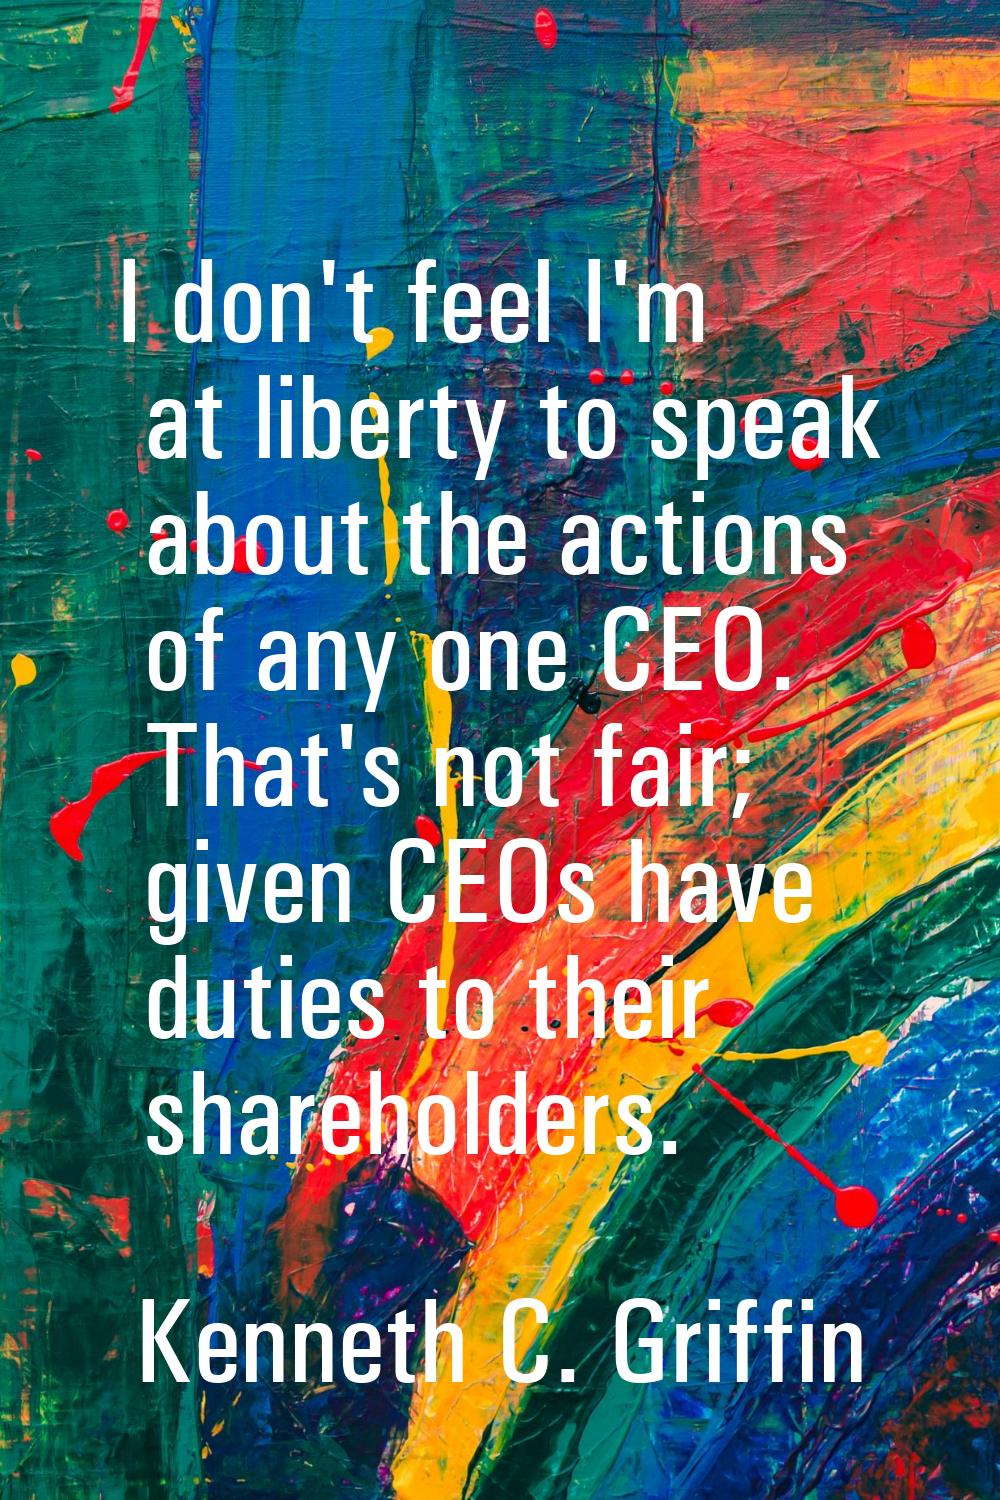 I don't feel I'm at liberty to speak about the actions of any one CEO. That's not fair; given CEOs 